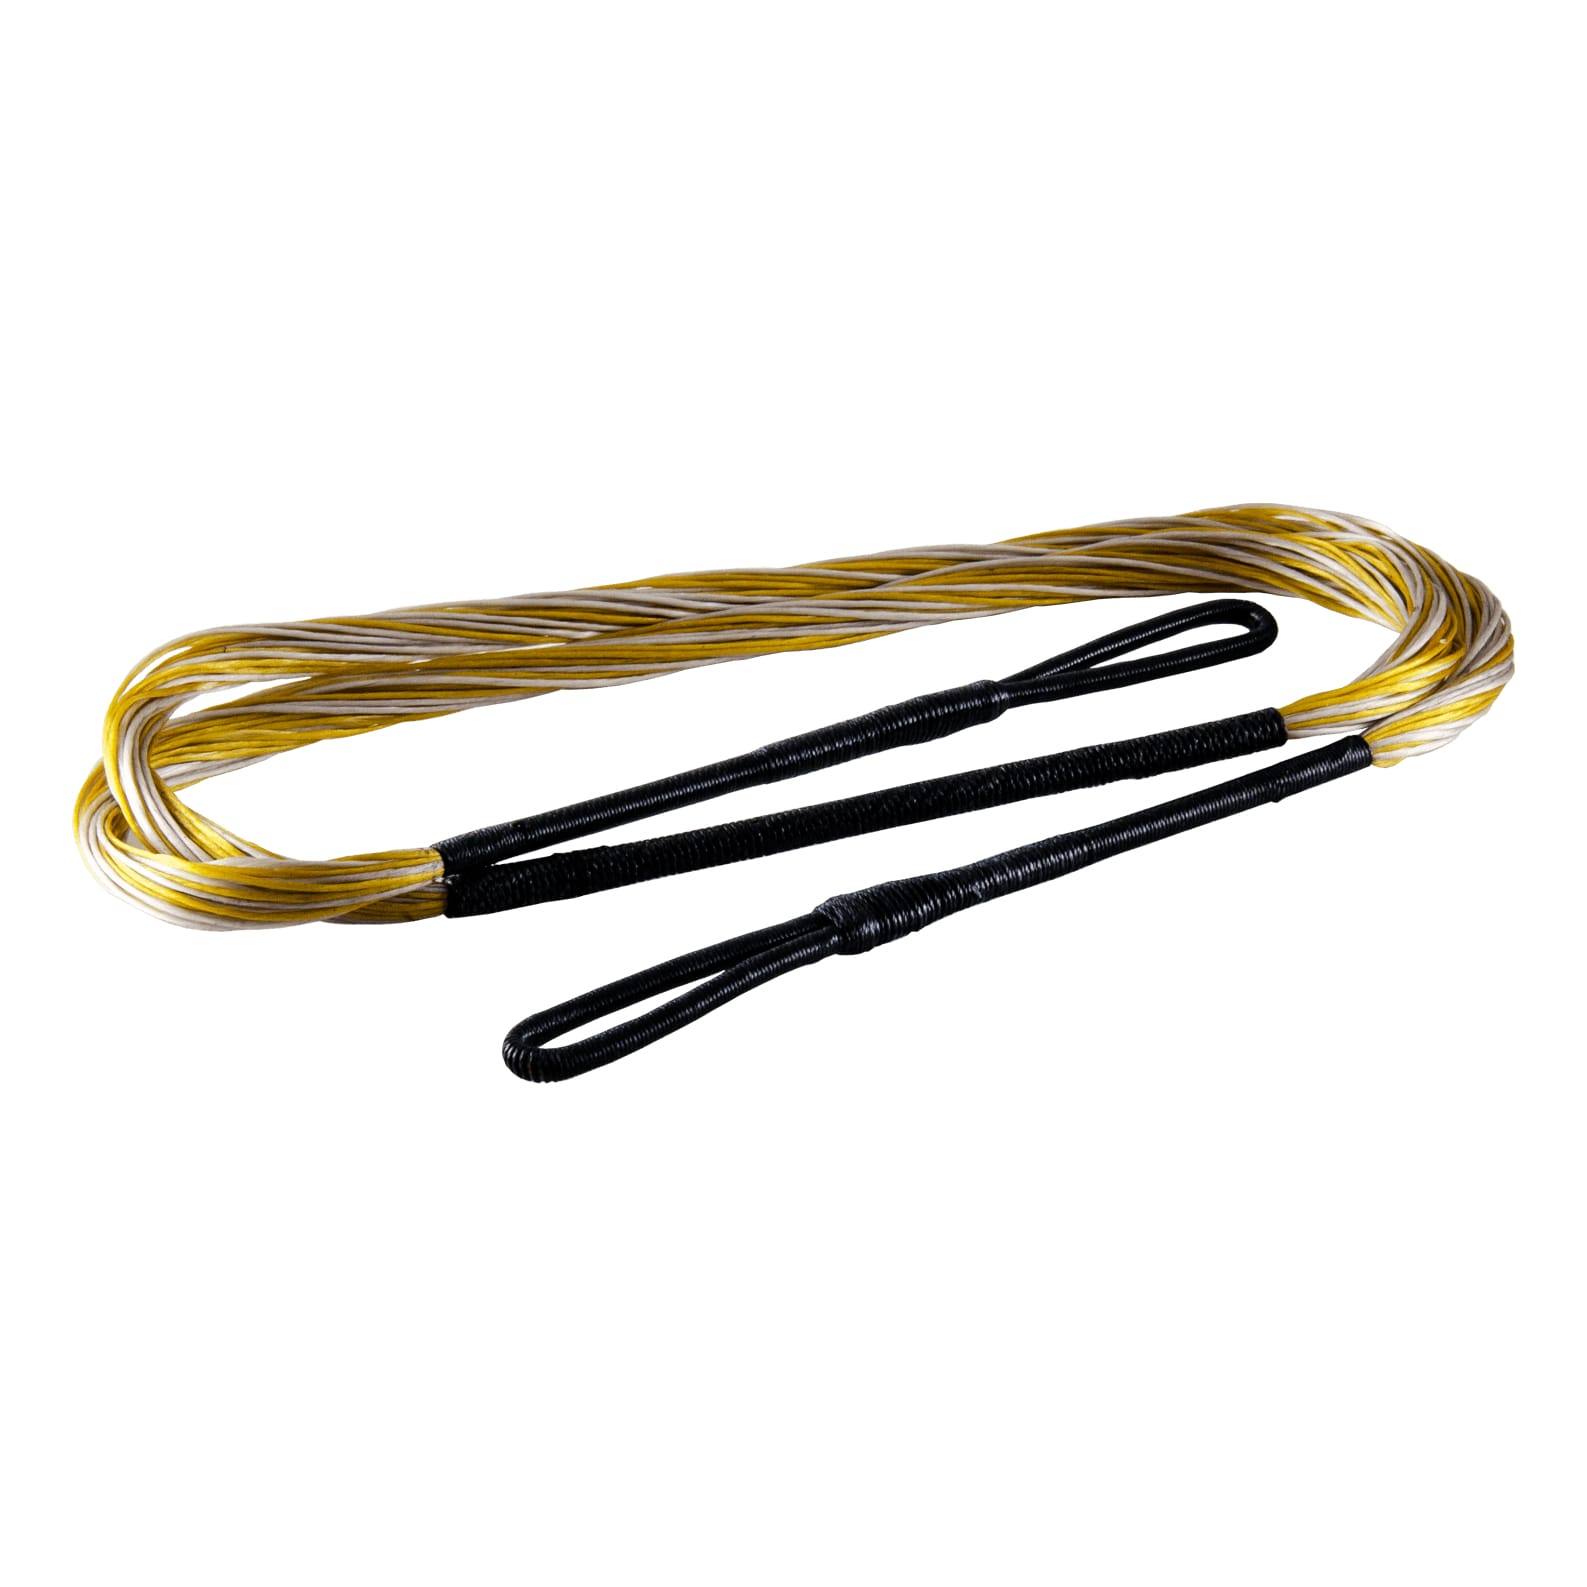 Excalibur® Excel Crossbow String